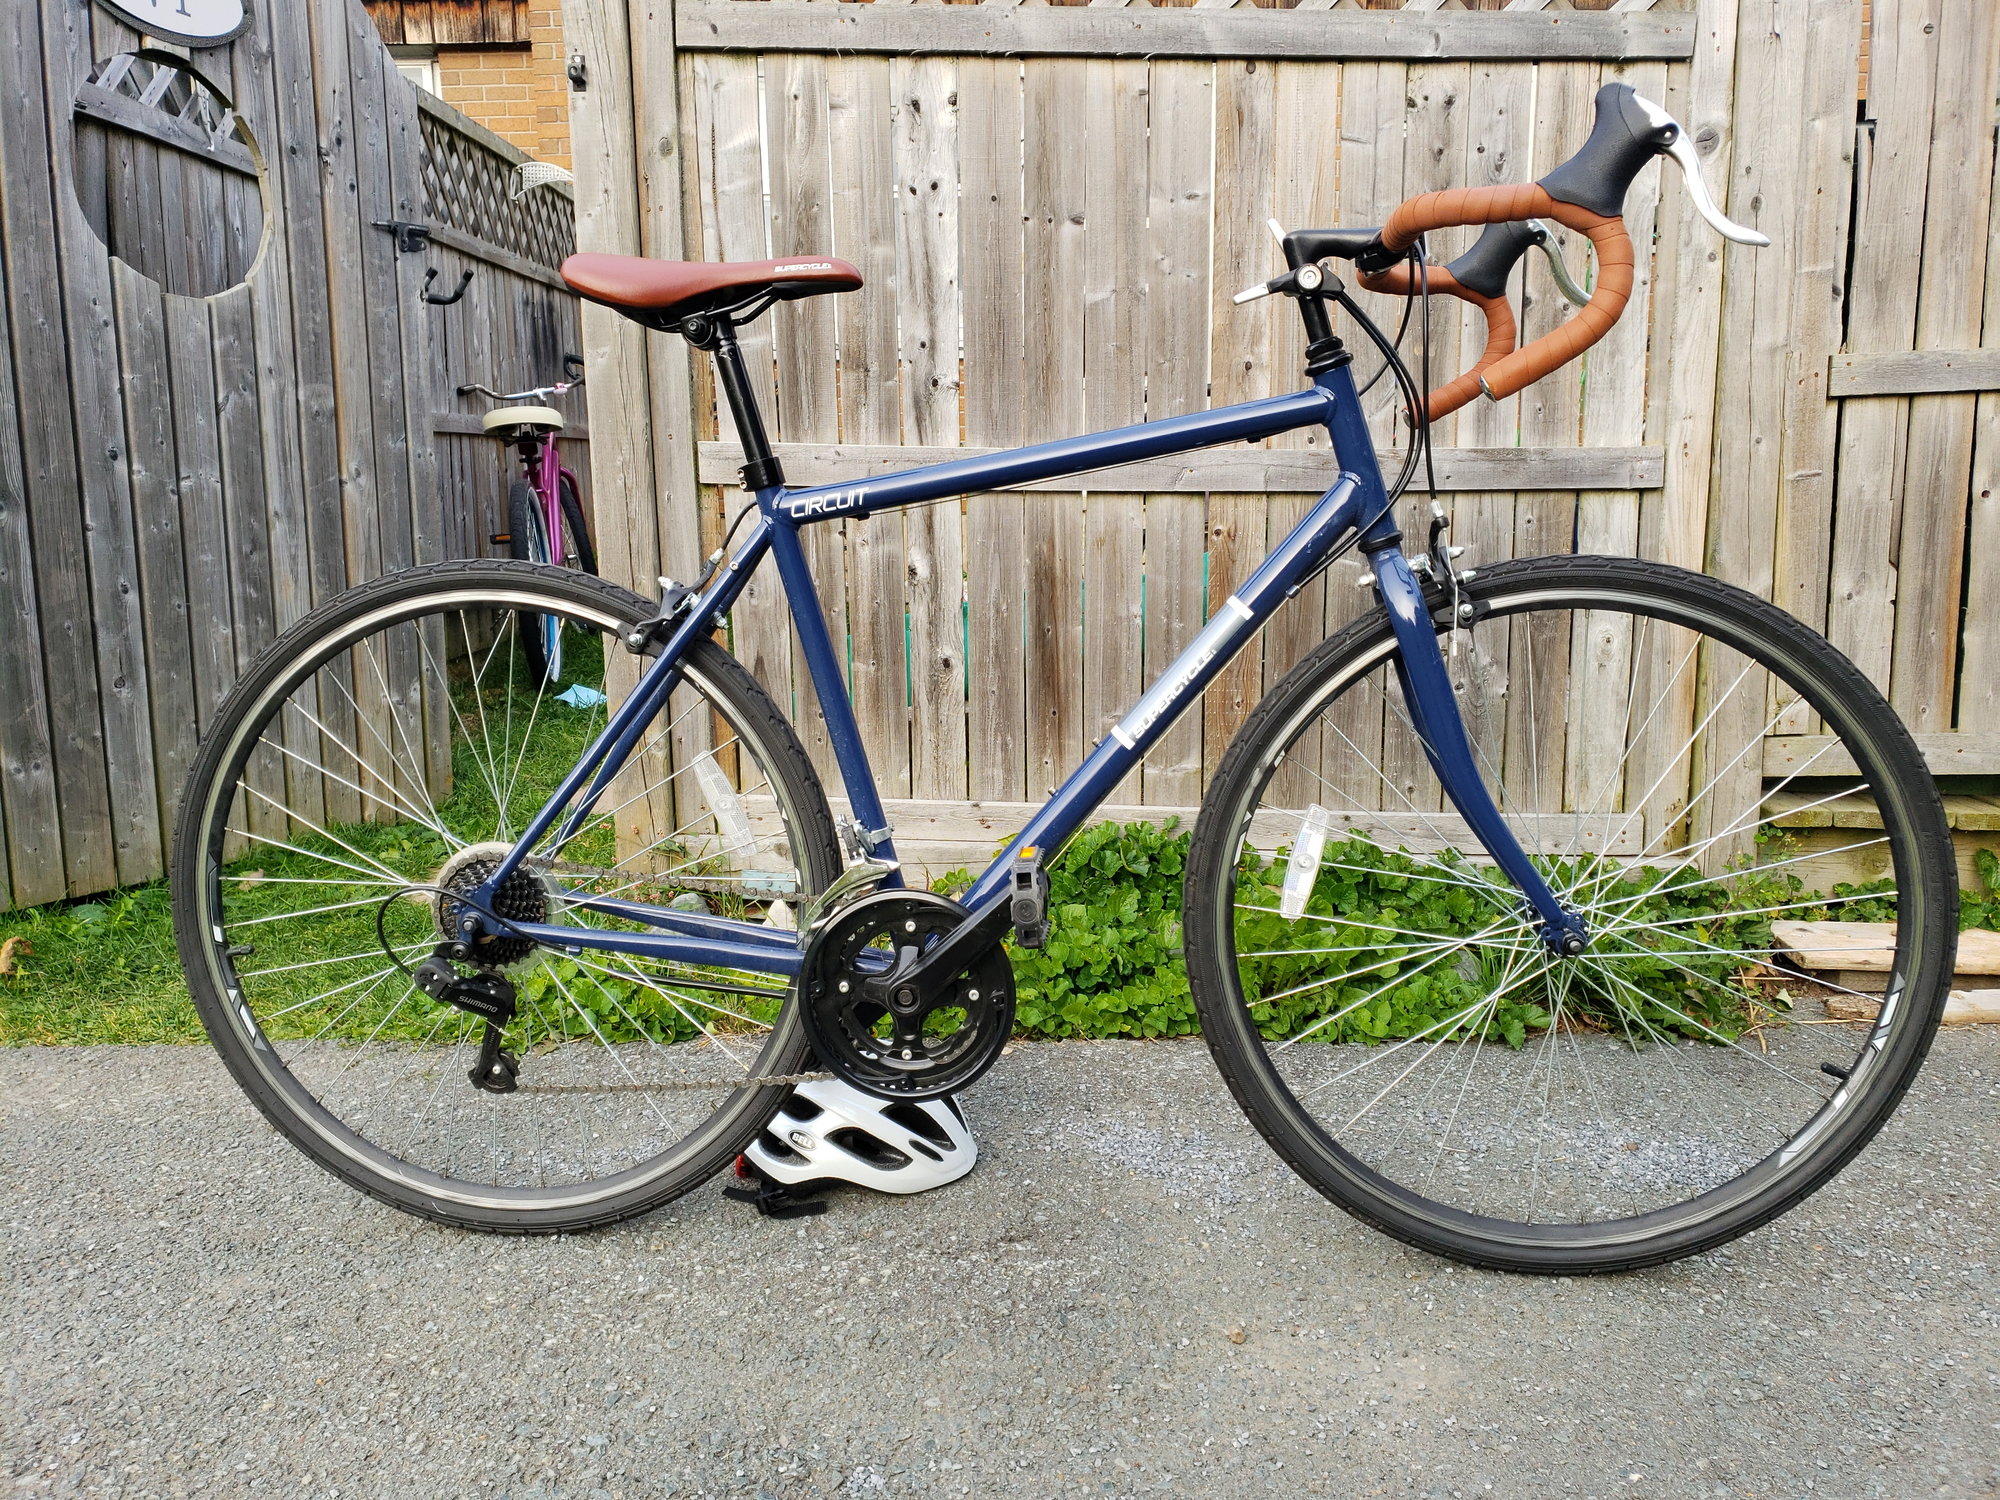 supercycle circuit 700c review